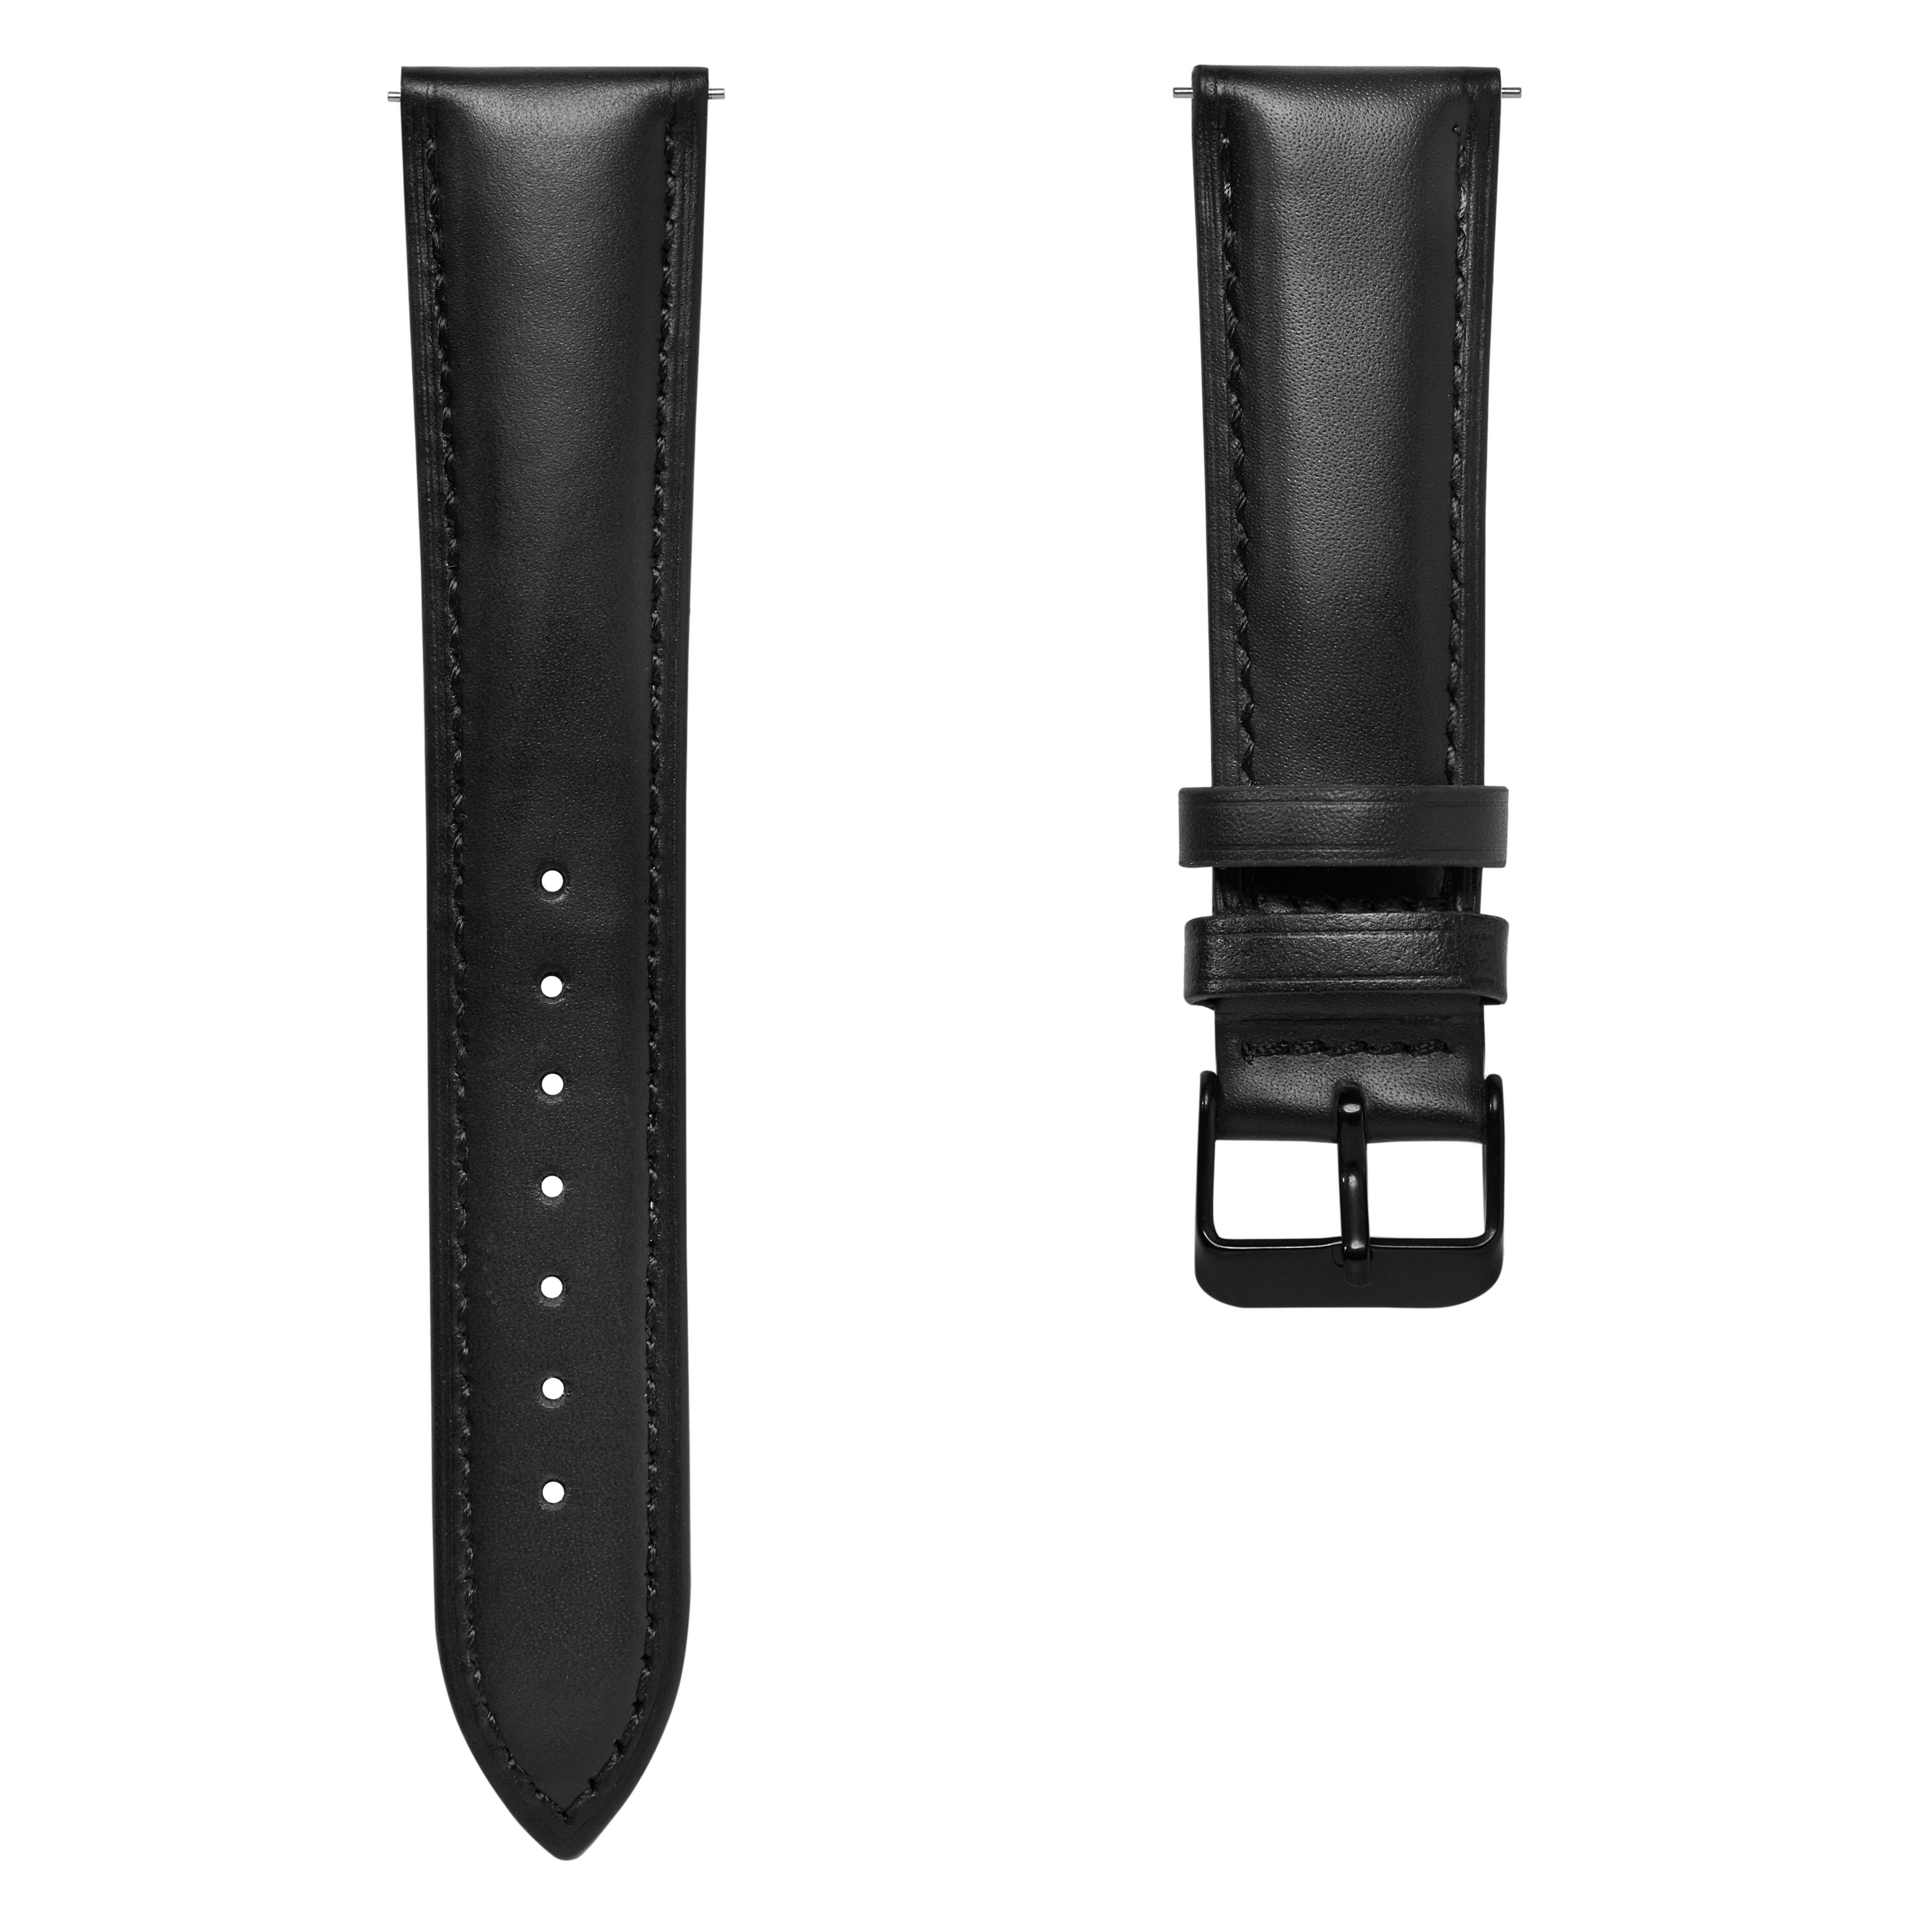 18mm Black Leather Watch Strap with Gold-Tone Buckle – Quick Release - for Men - Trendhim